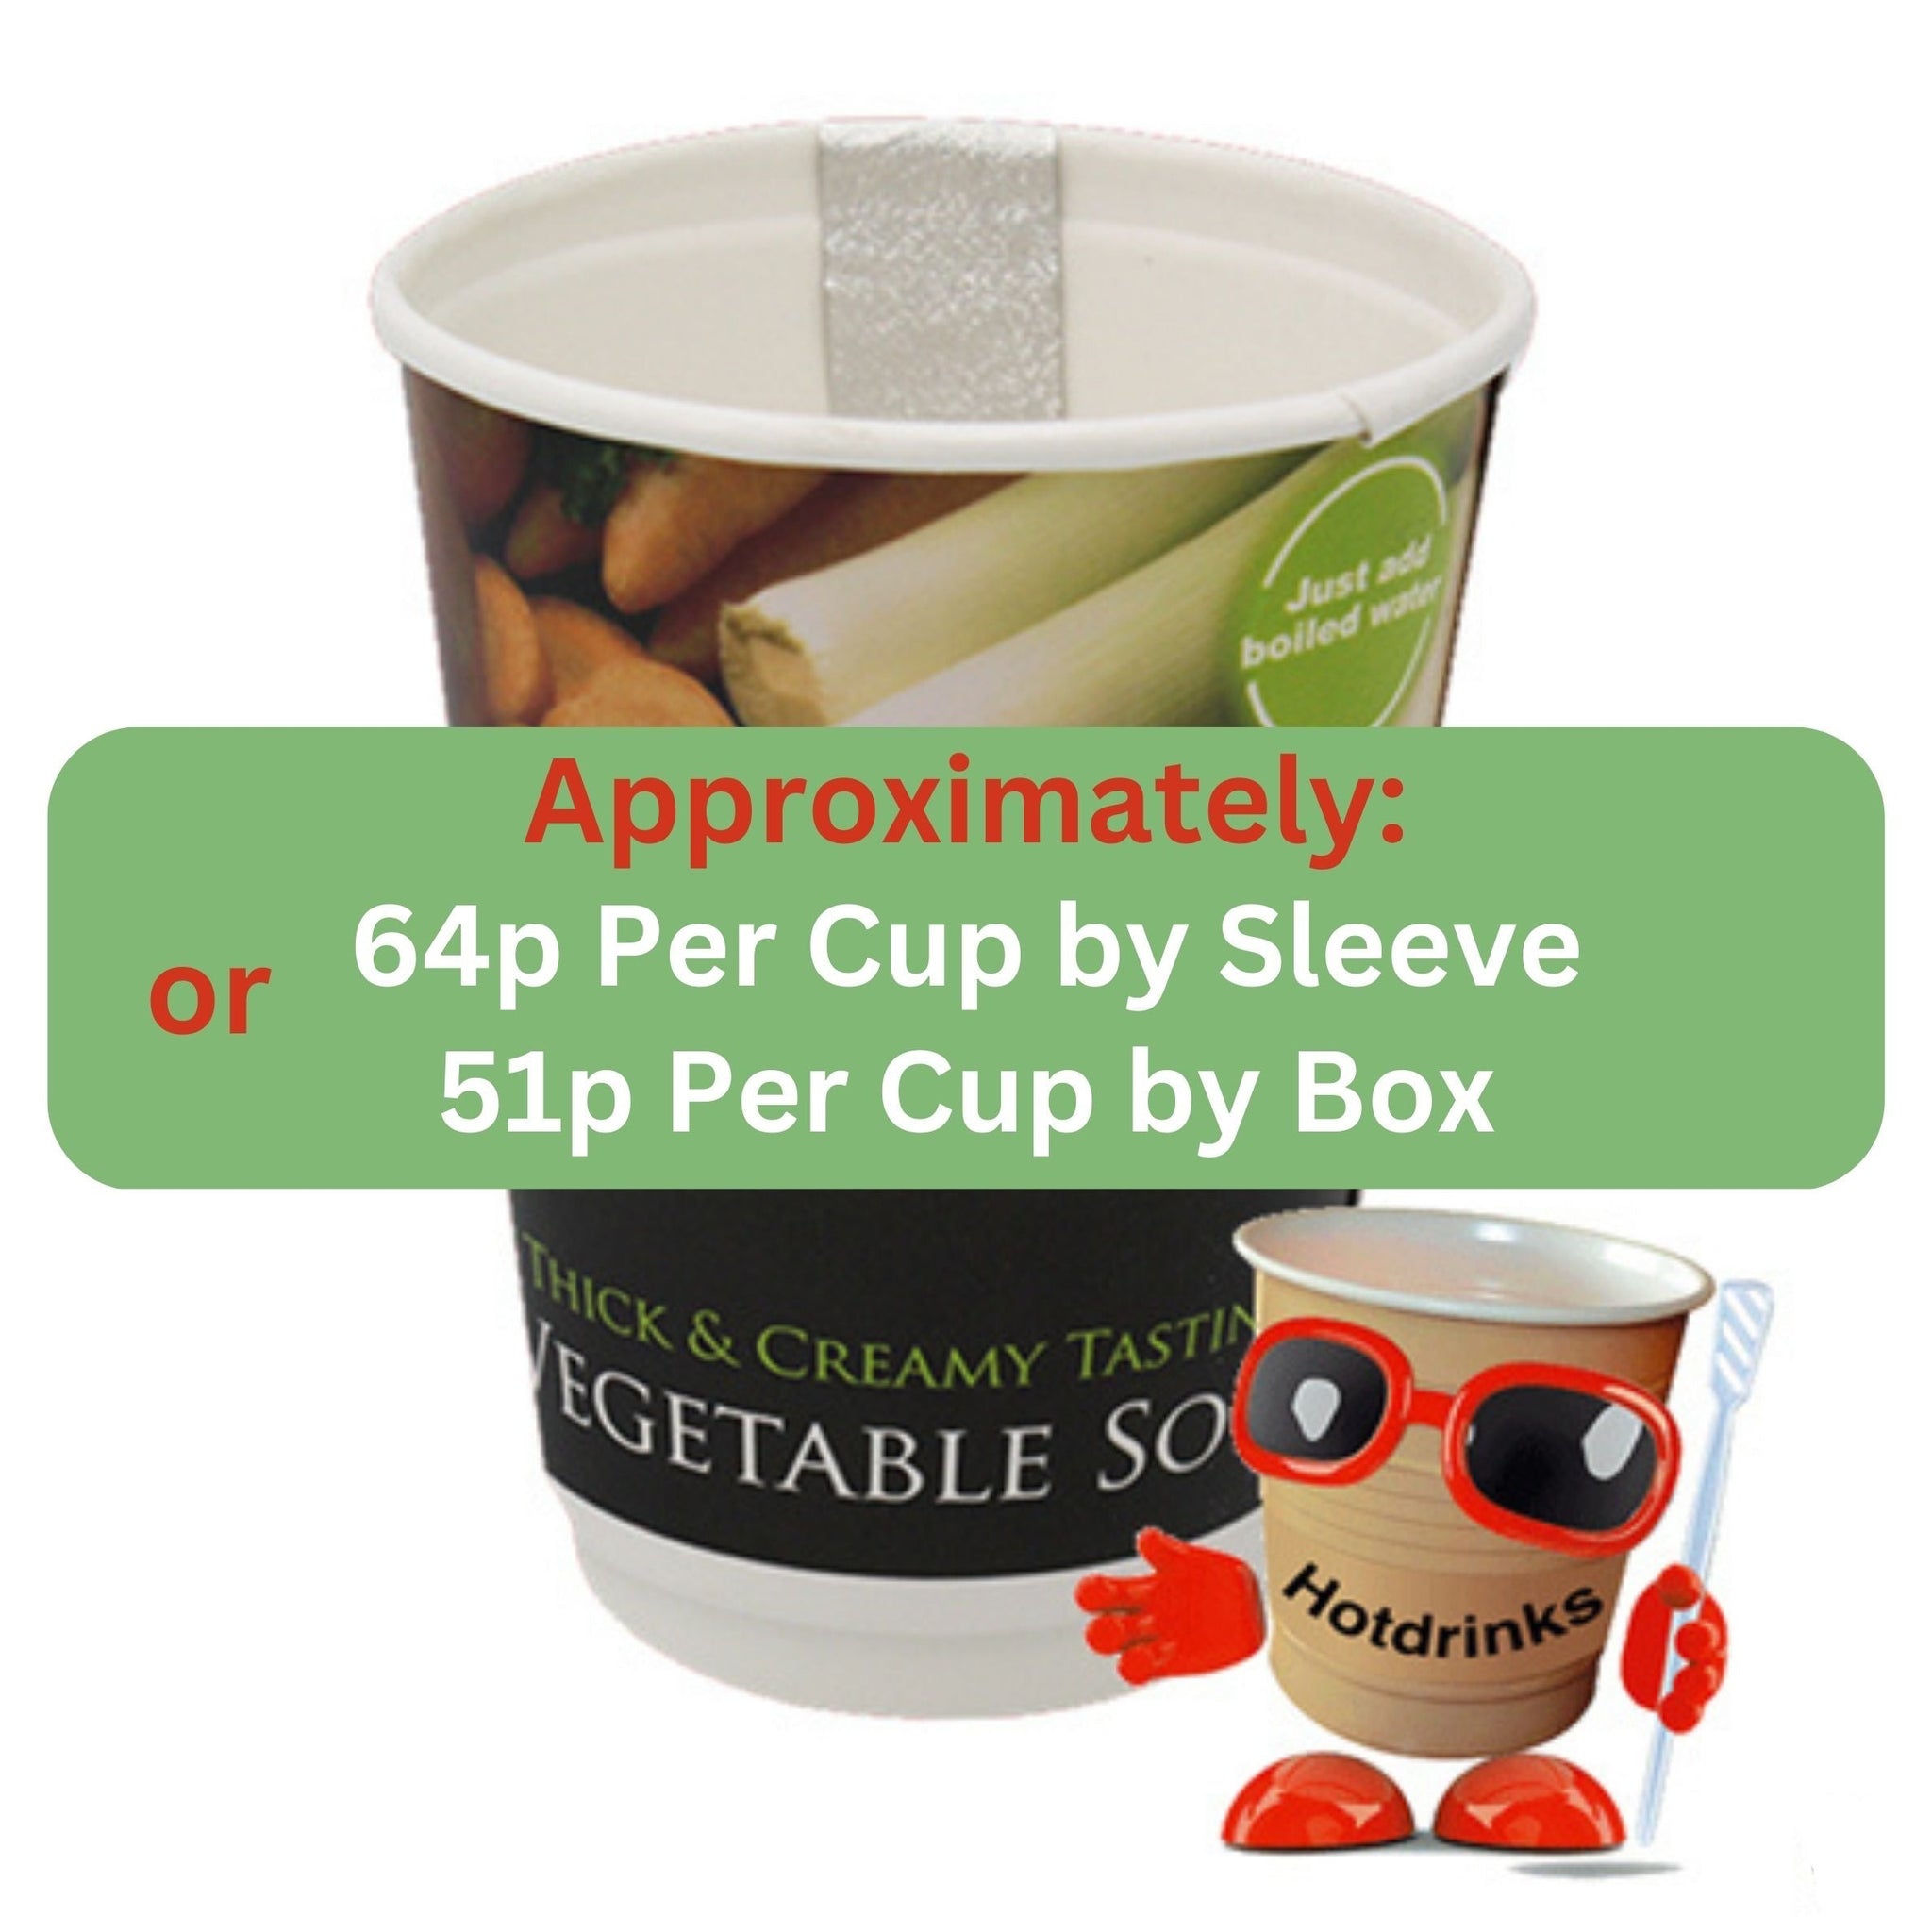 2Go Vegetable Soup, 10 or 150 cups